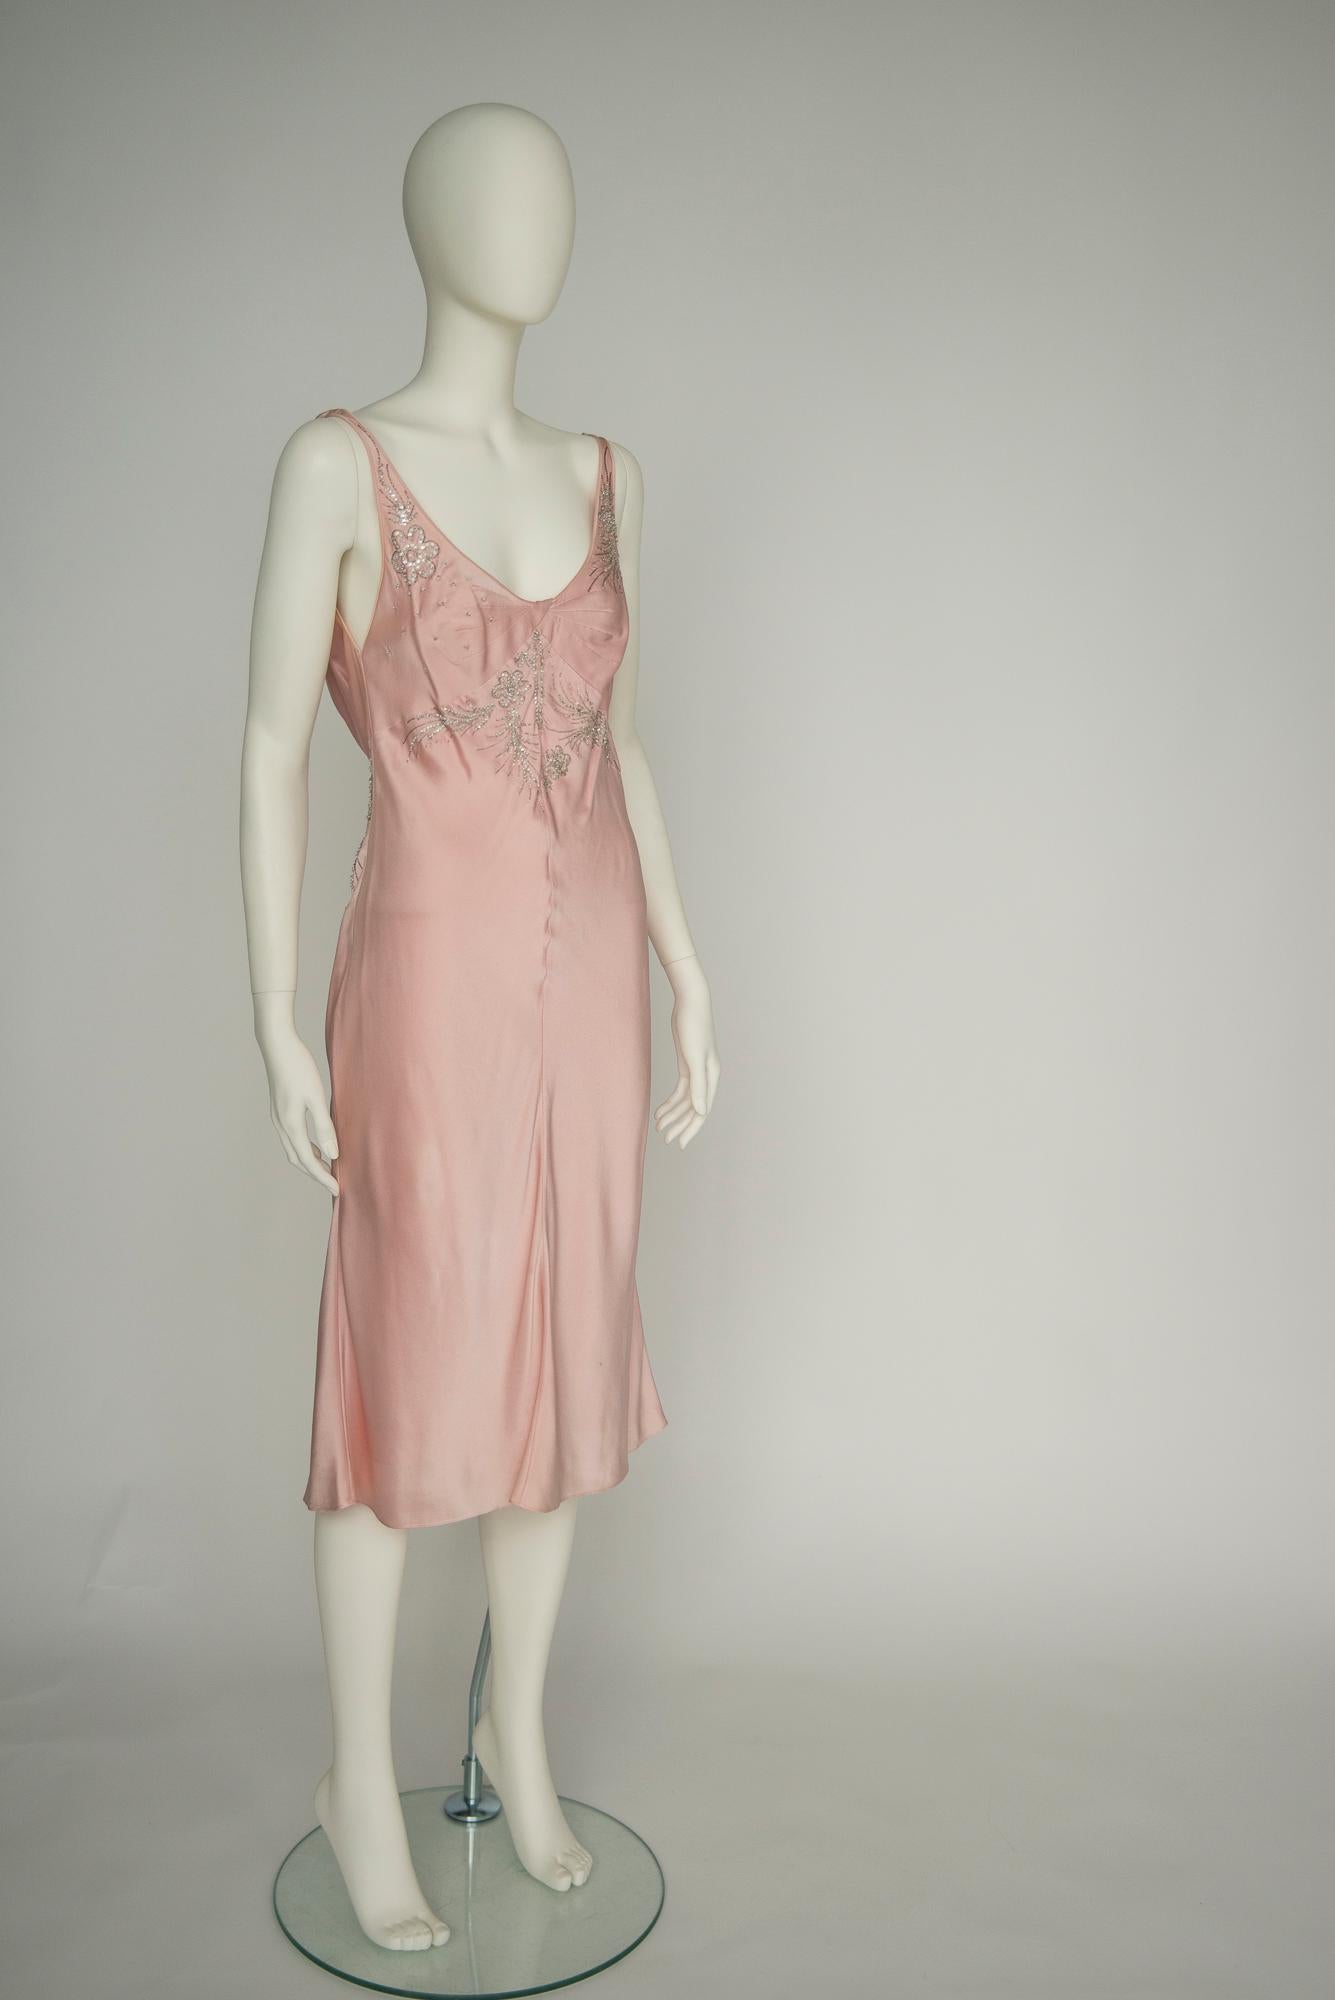 From the 2004 Fall-Winter collection, this John Galliano for Christian Dior cocktail dress is cut from refined light pink silk-satin that delicately skims the figure. Reminiscent of styles worn in the 30’s and 40’s, the dress is beautifully